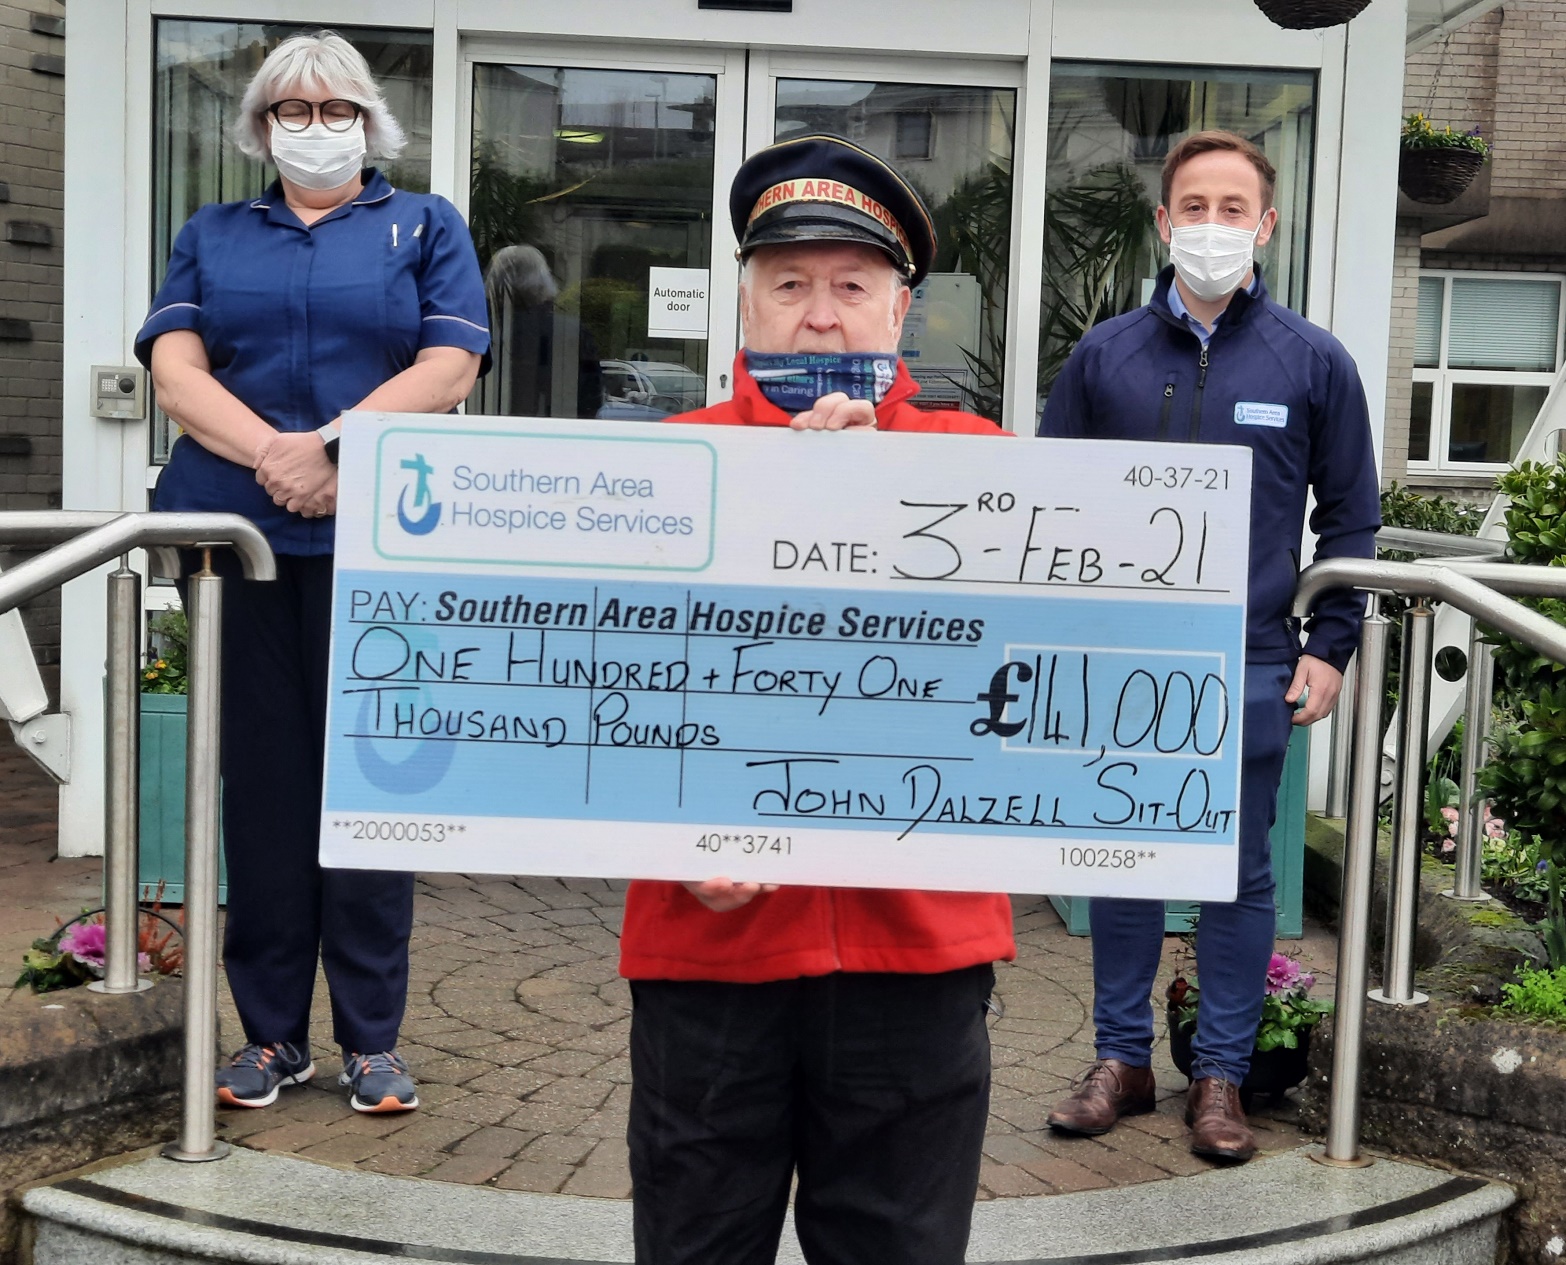 John Dalzell’s 29th Christmas sit-out raises £141,000 for Hospice | Newry Times